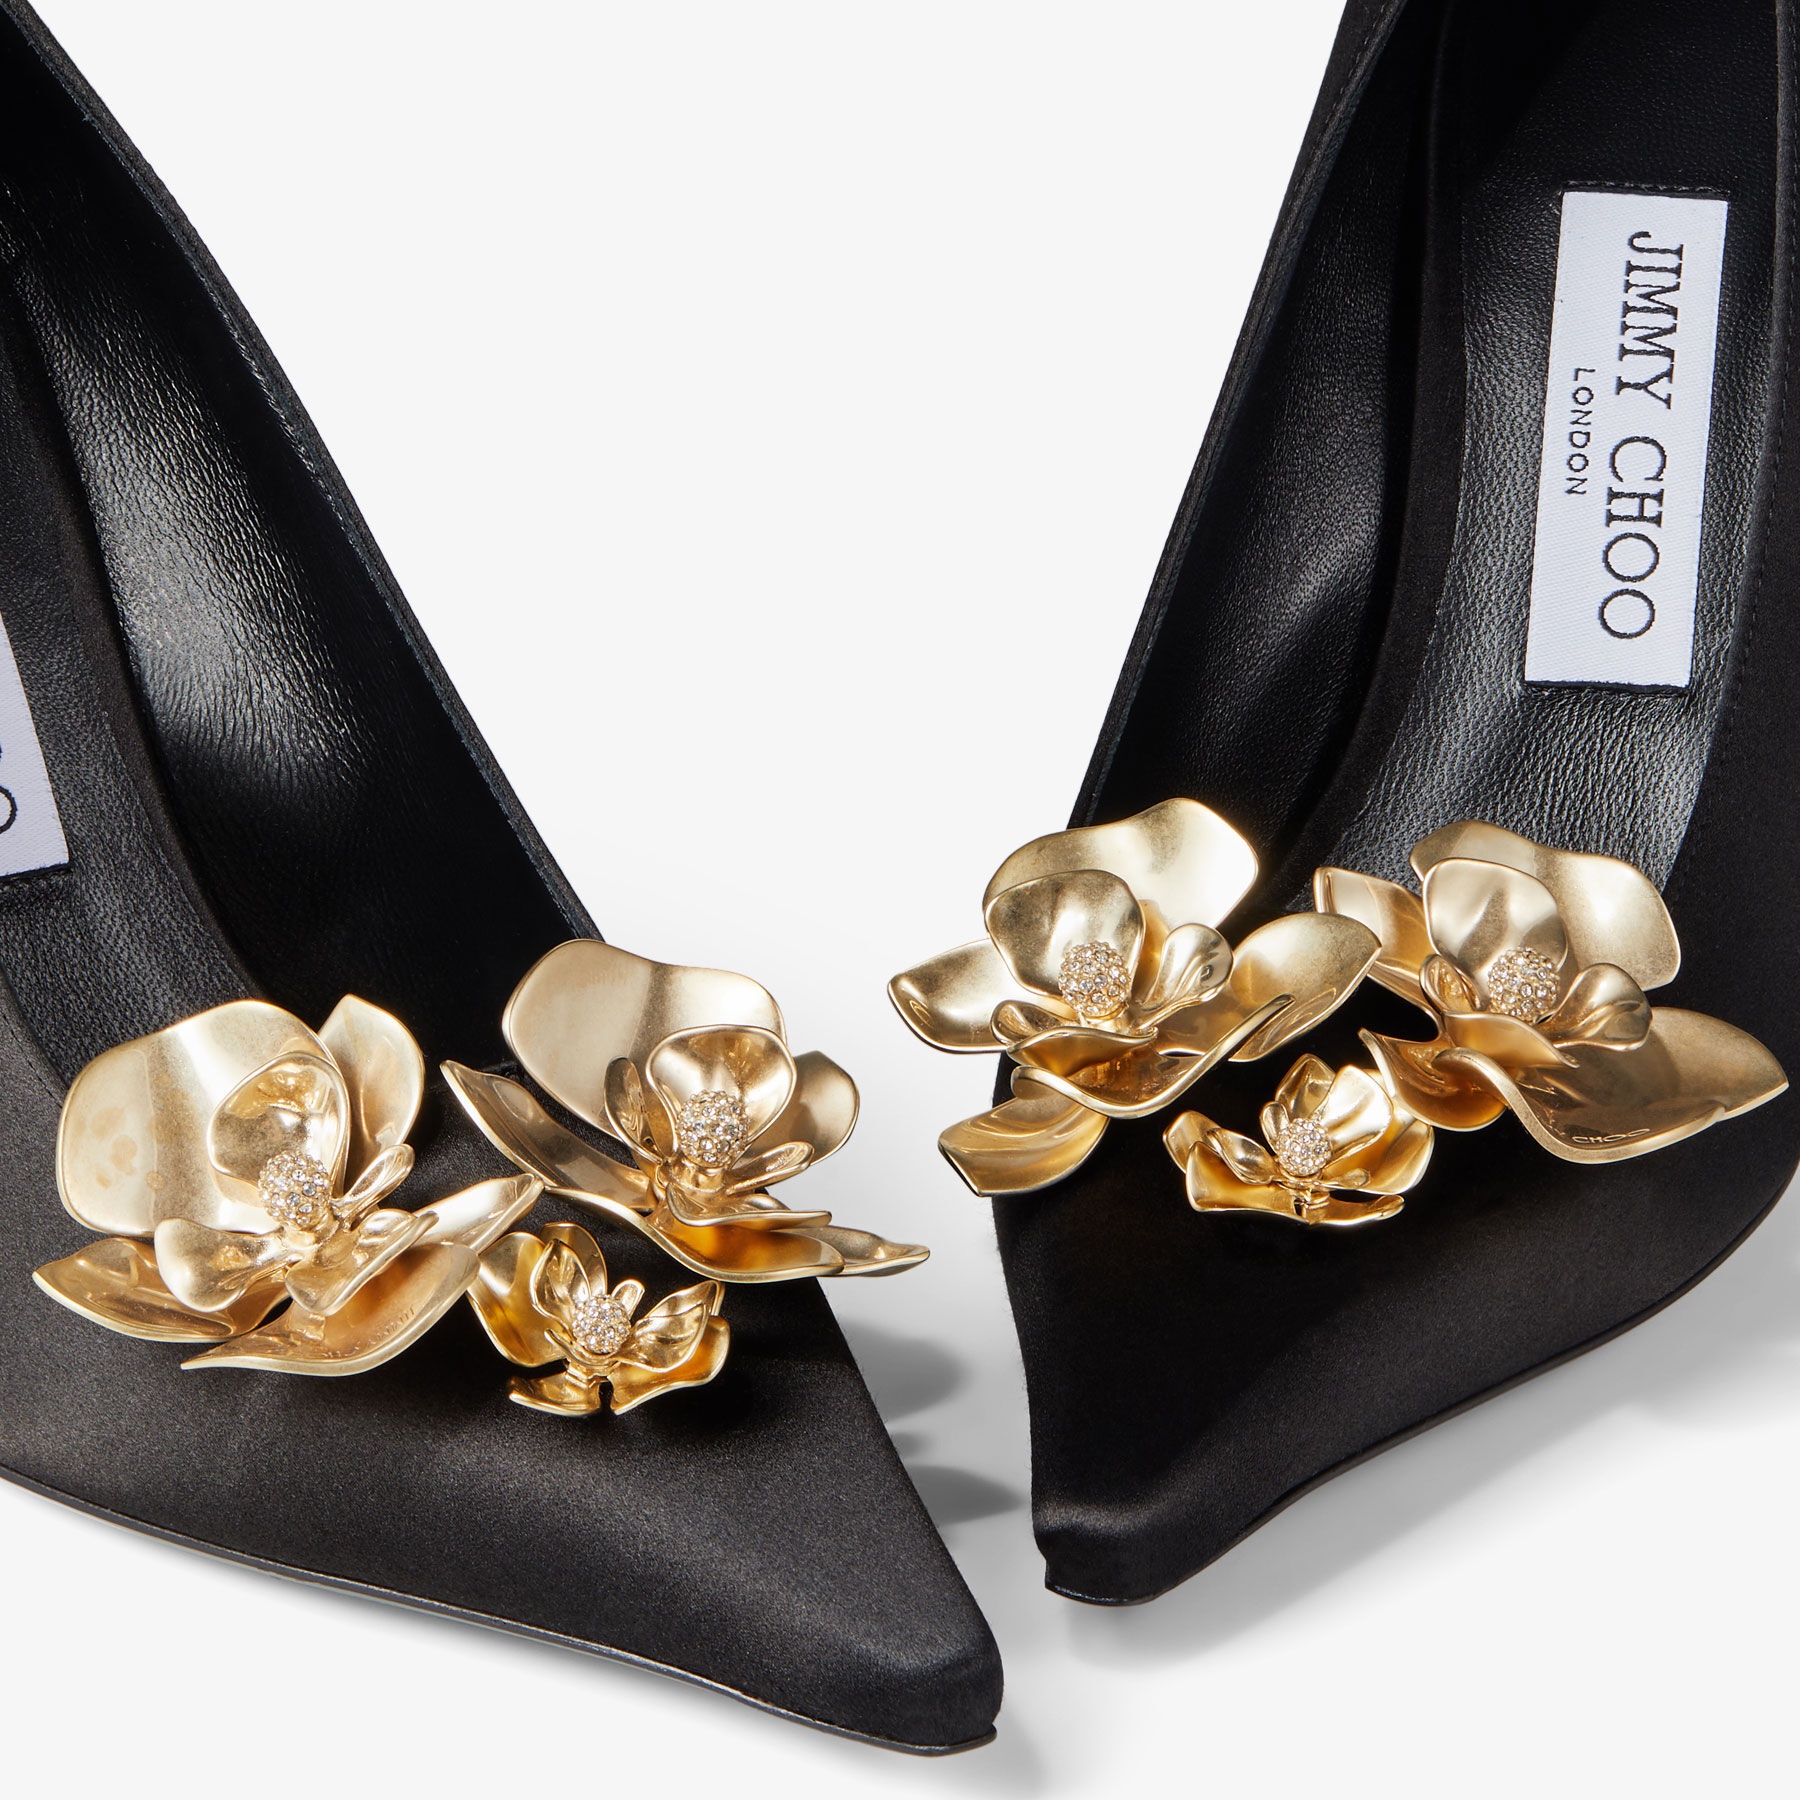 Ixia 95
Black Satin Pumps with Flowers - 5